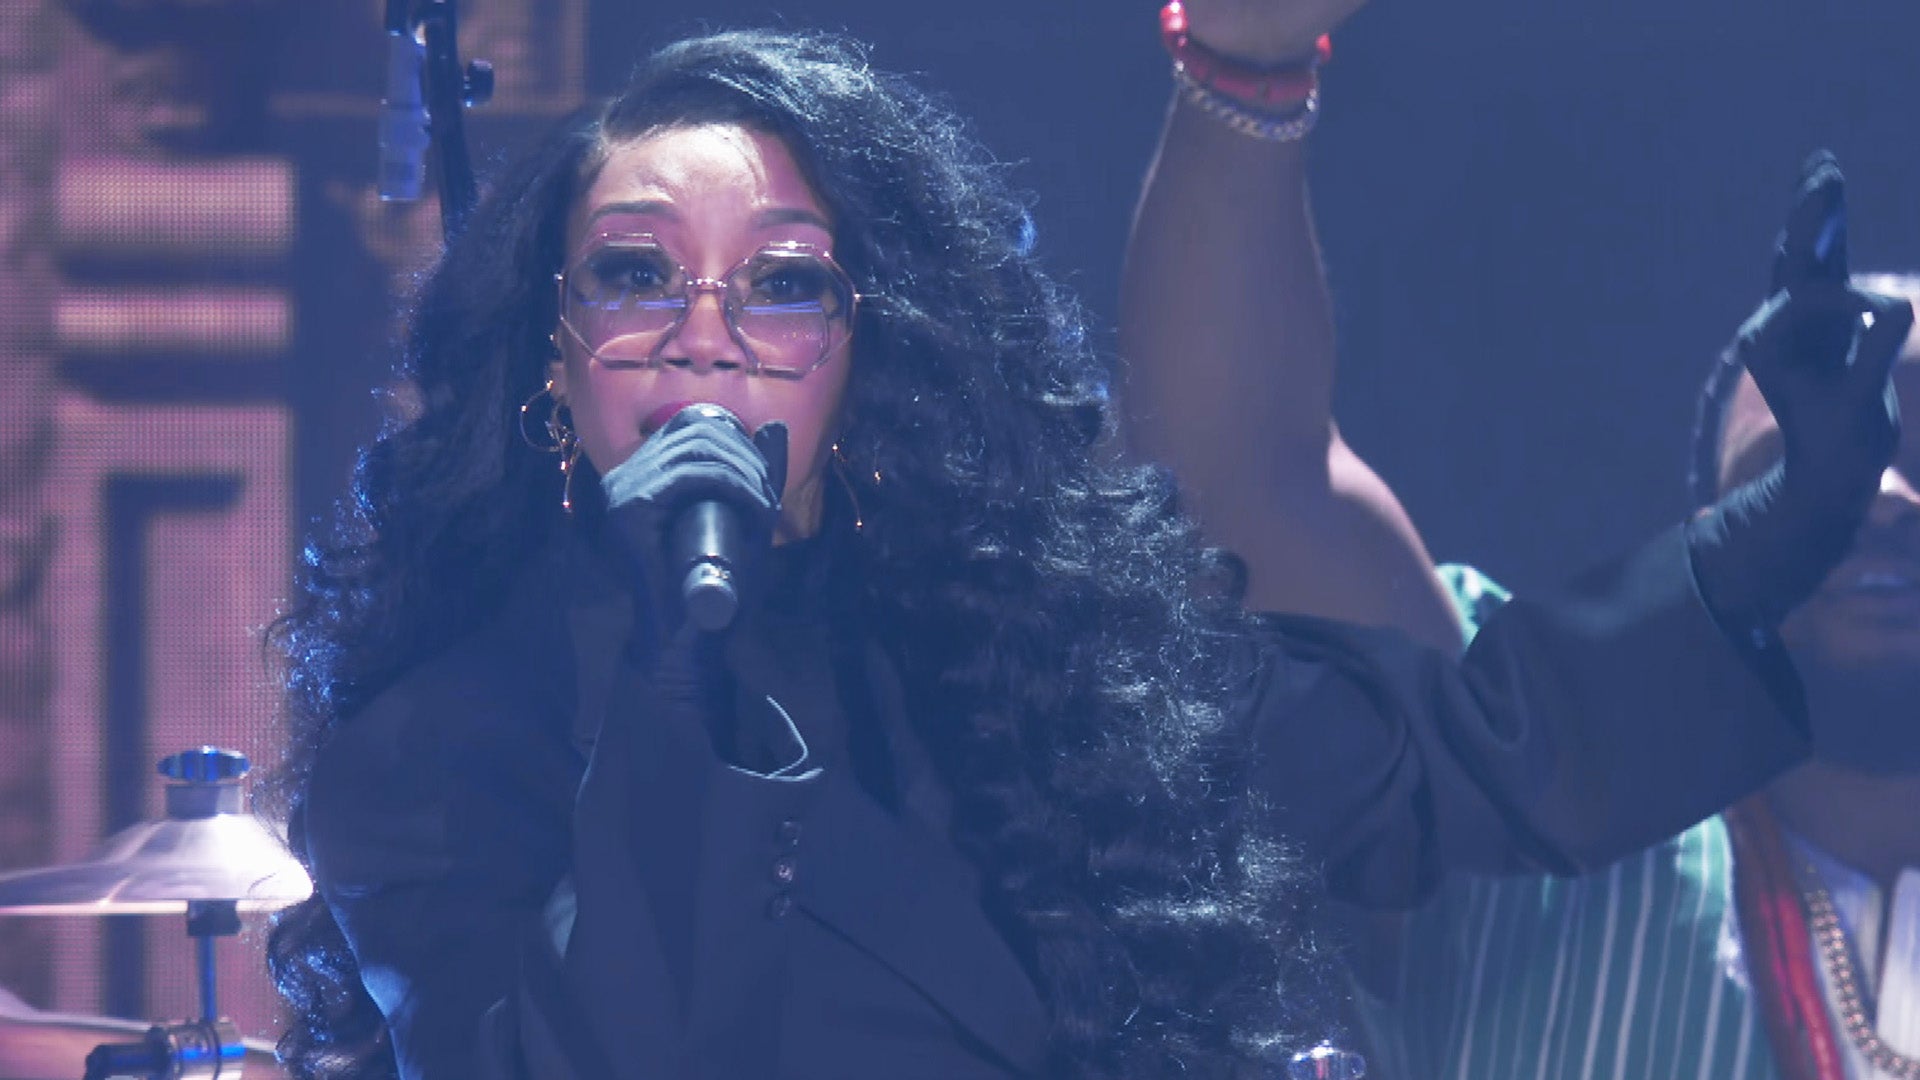 GRAMMYS: Brandy Joins Burna Boy and 21 Savage for 'Sittin' on Top of the World' Performance